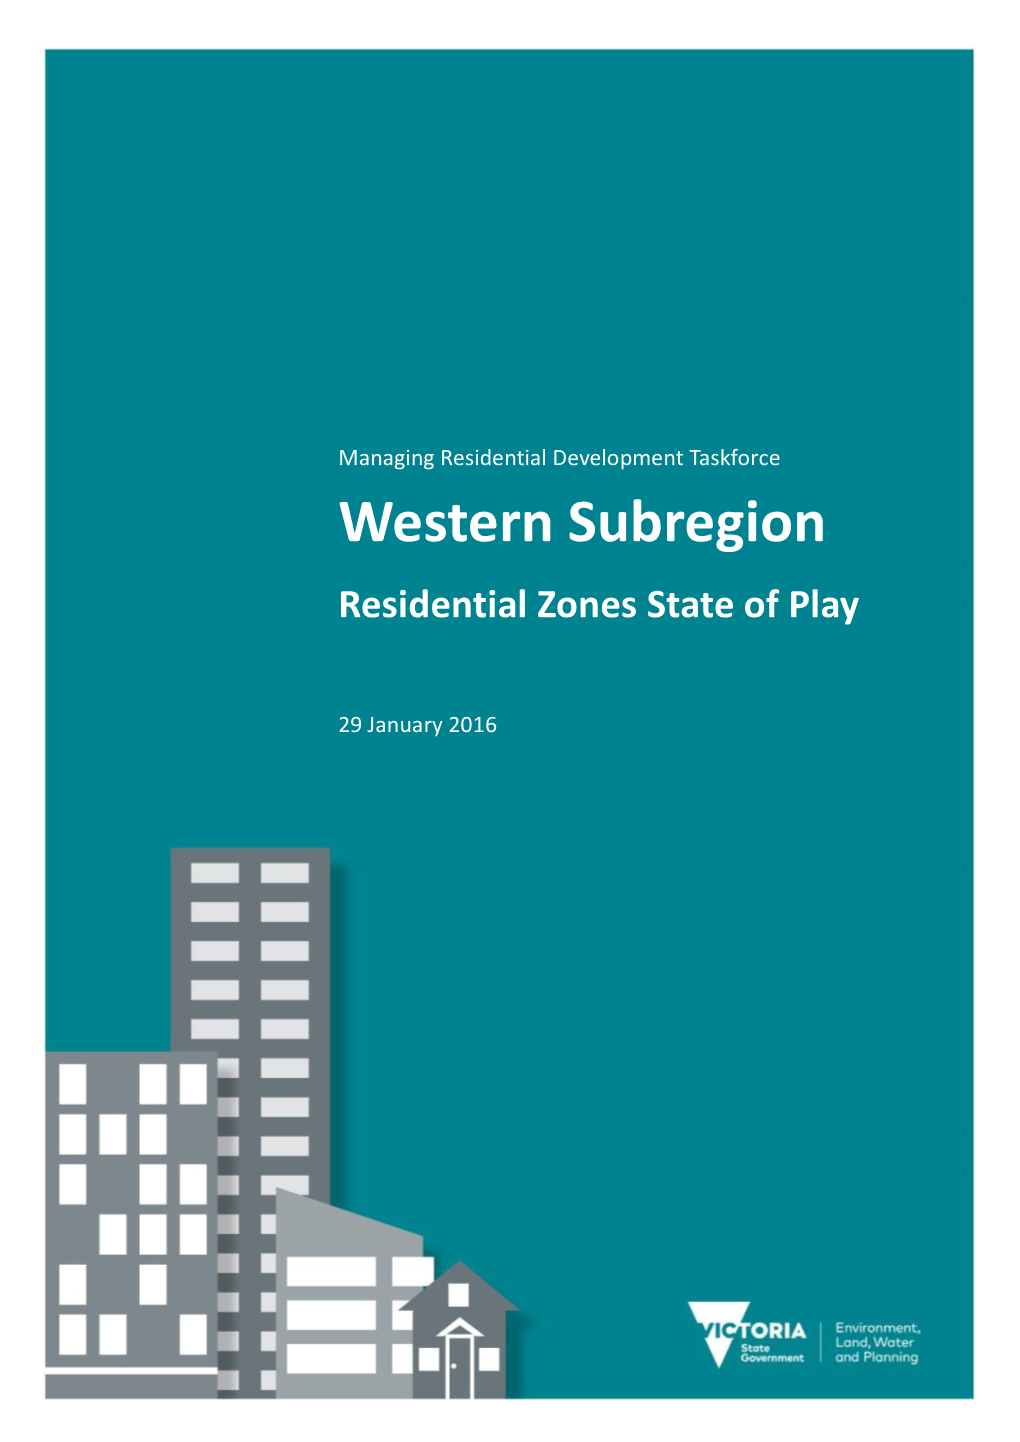 Western Subregion Residential Zones State of Play